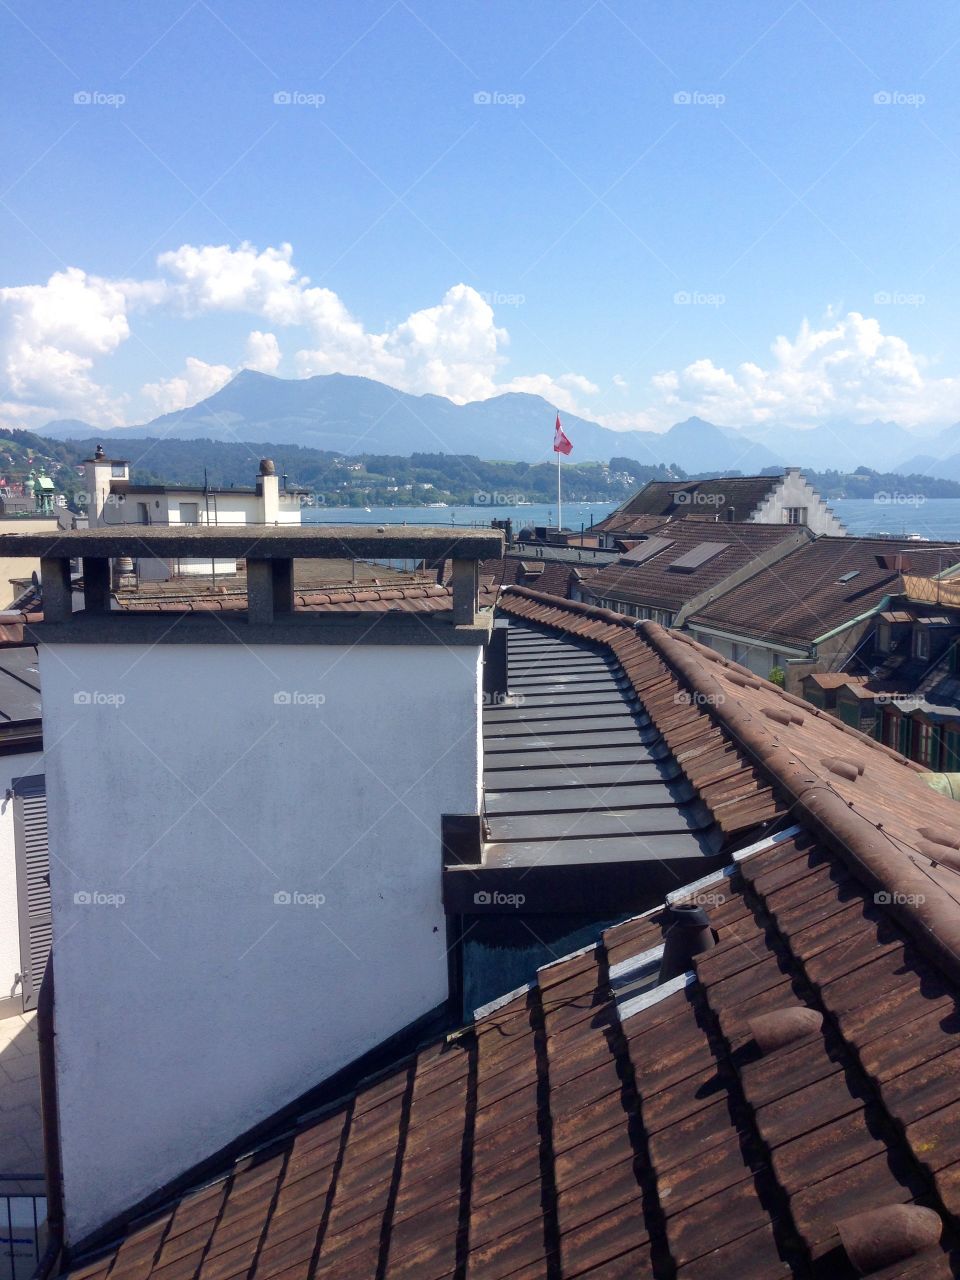 Rooftop view from Lucerne, Switzerland.